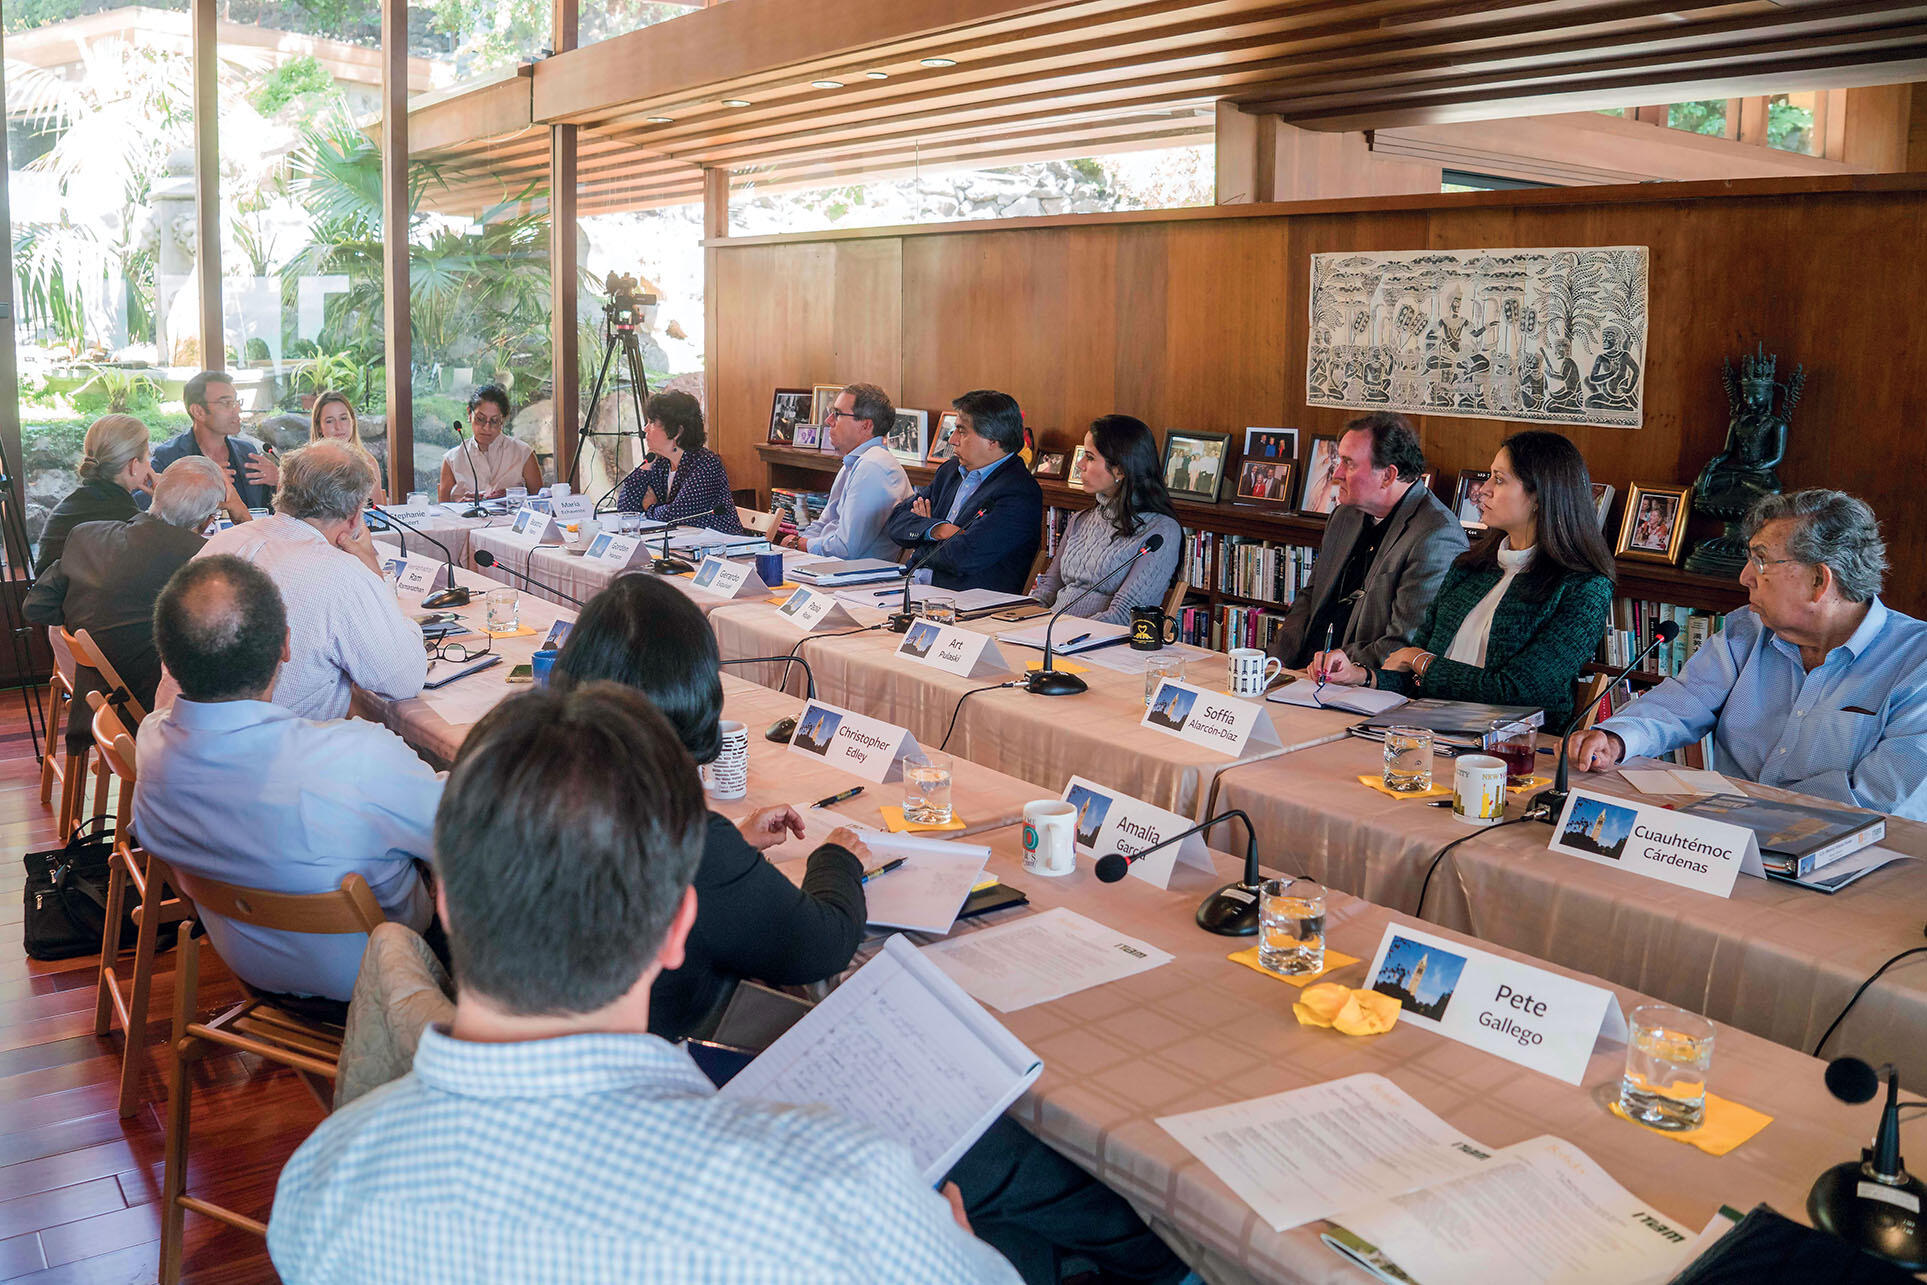 Participants around a conference table discussing the challenges facing the United States and Mexico at the Futures Forum. (Photo by Jim Block.)